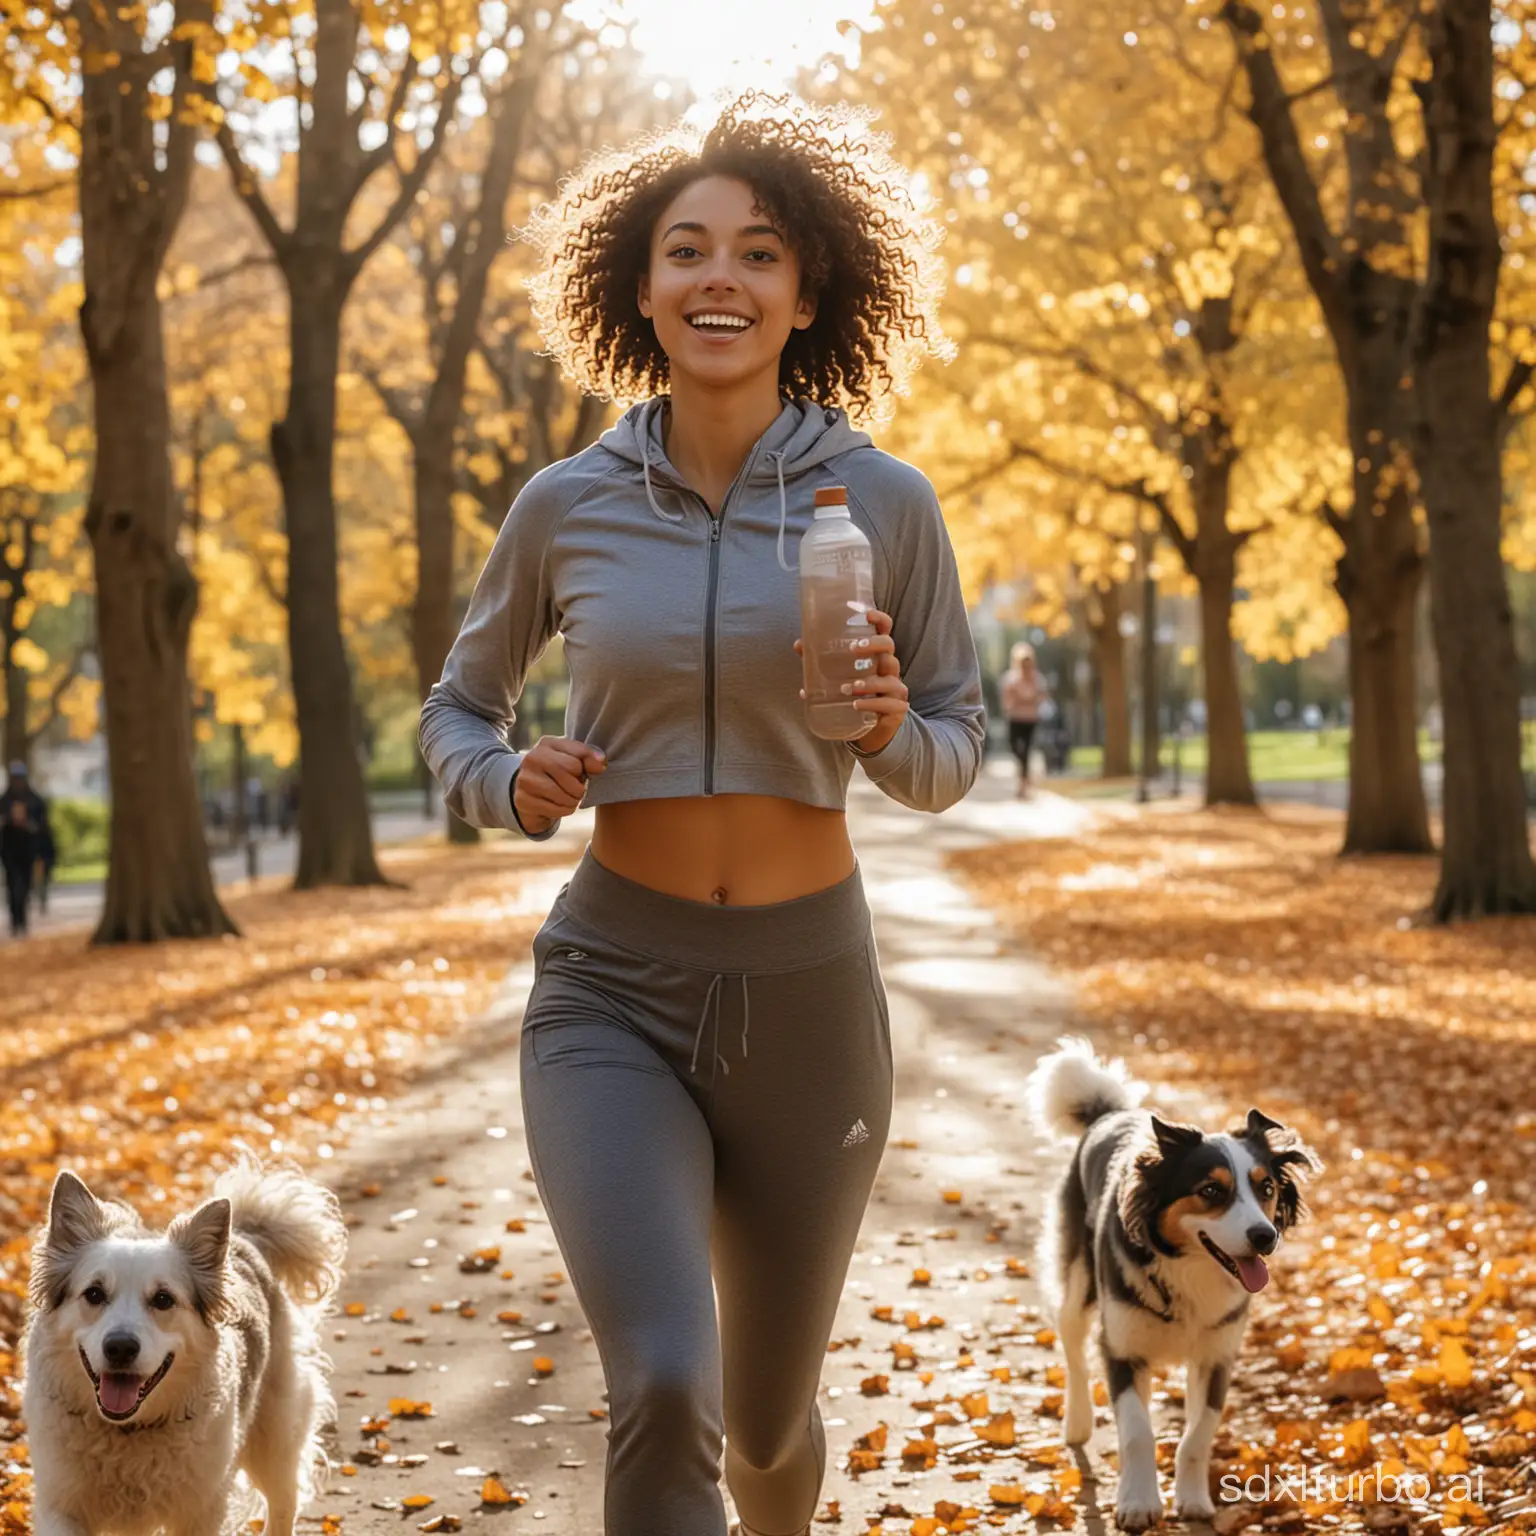 Curly-Haired-Girl-Running-with-Dog-in-Park-Athletic-Sportswear